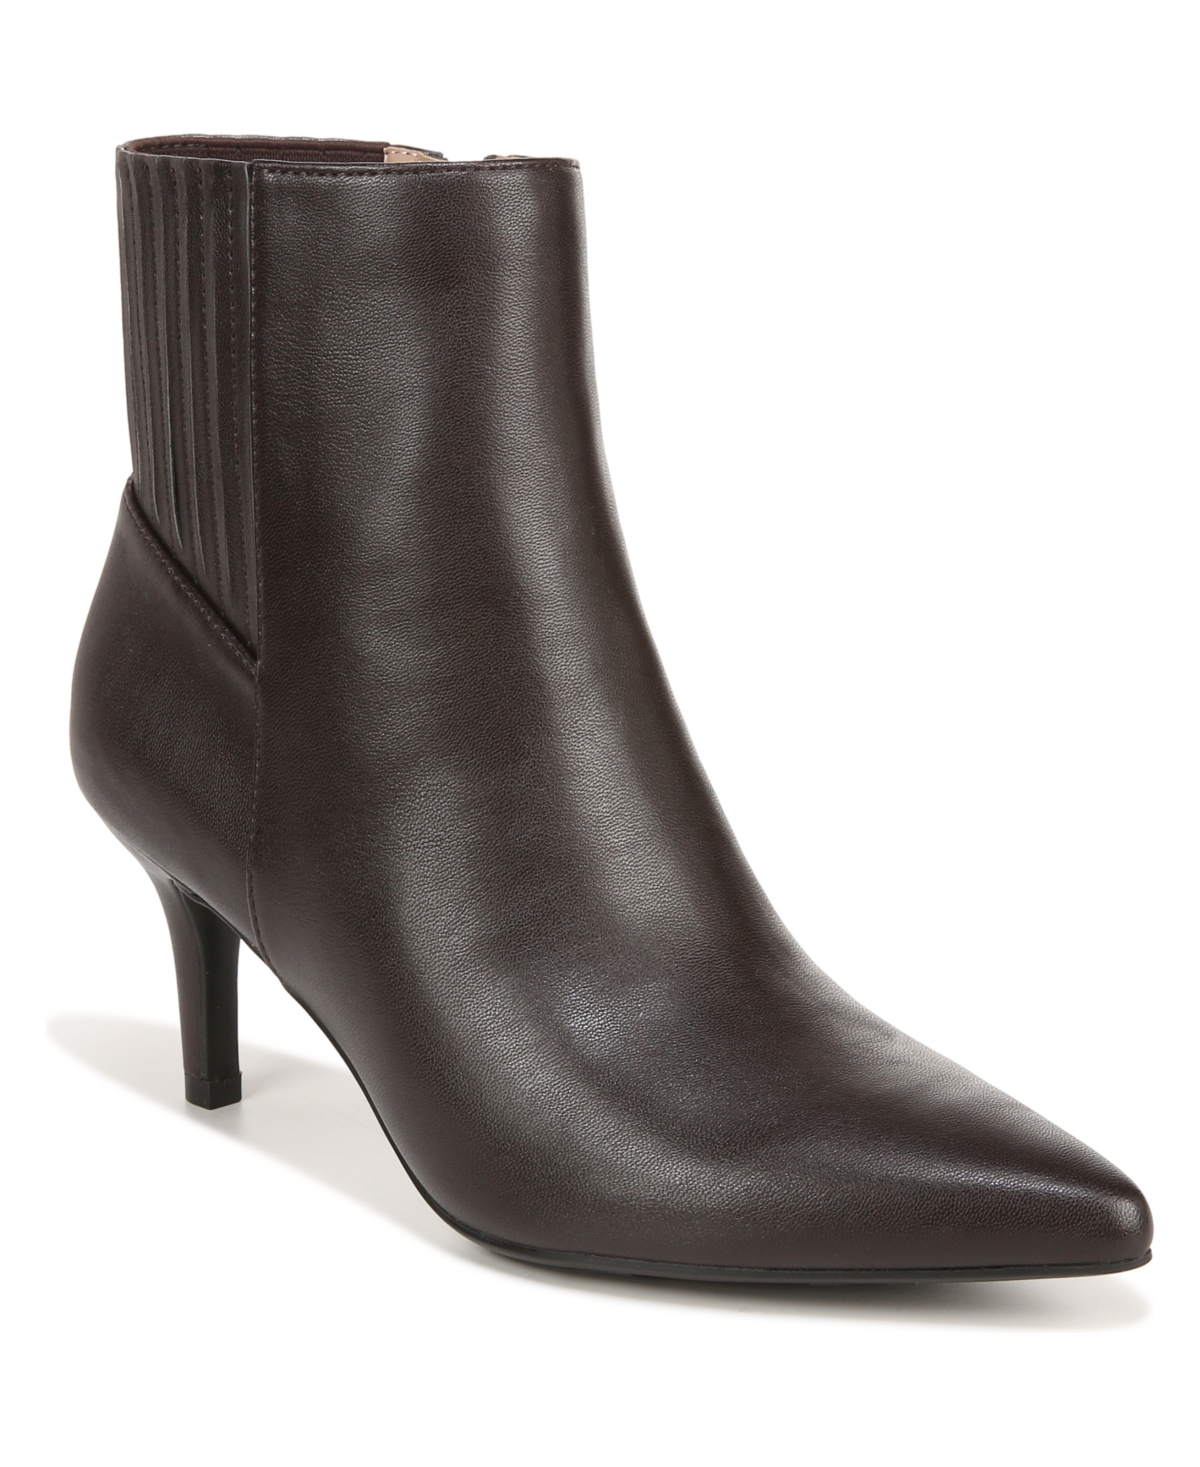 Sienna Dress Booties - Chocolate Faux Leather